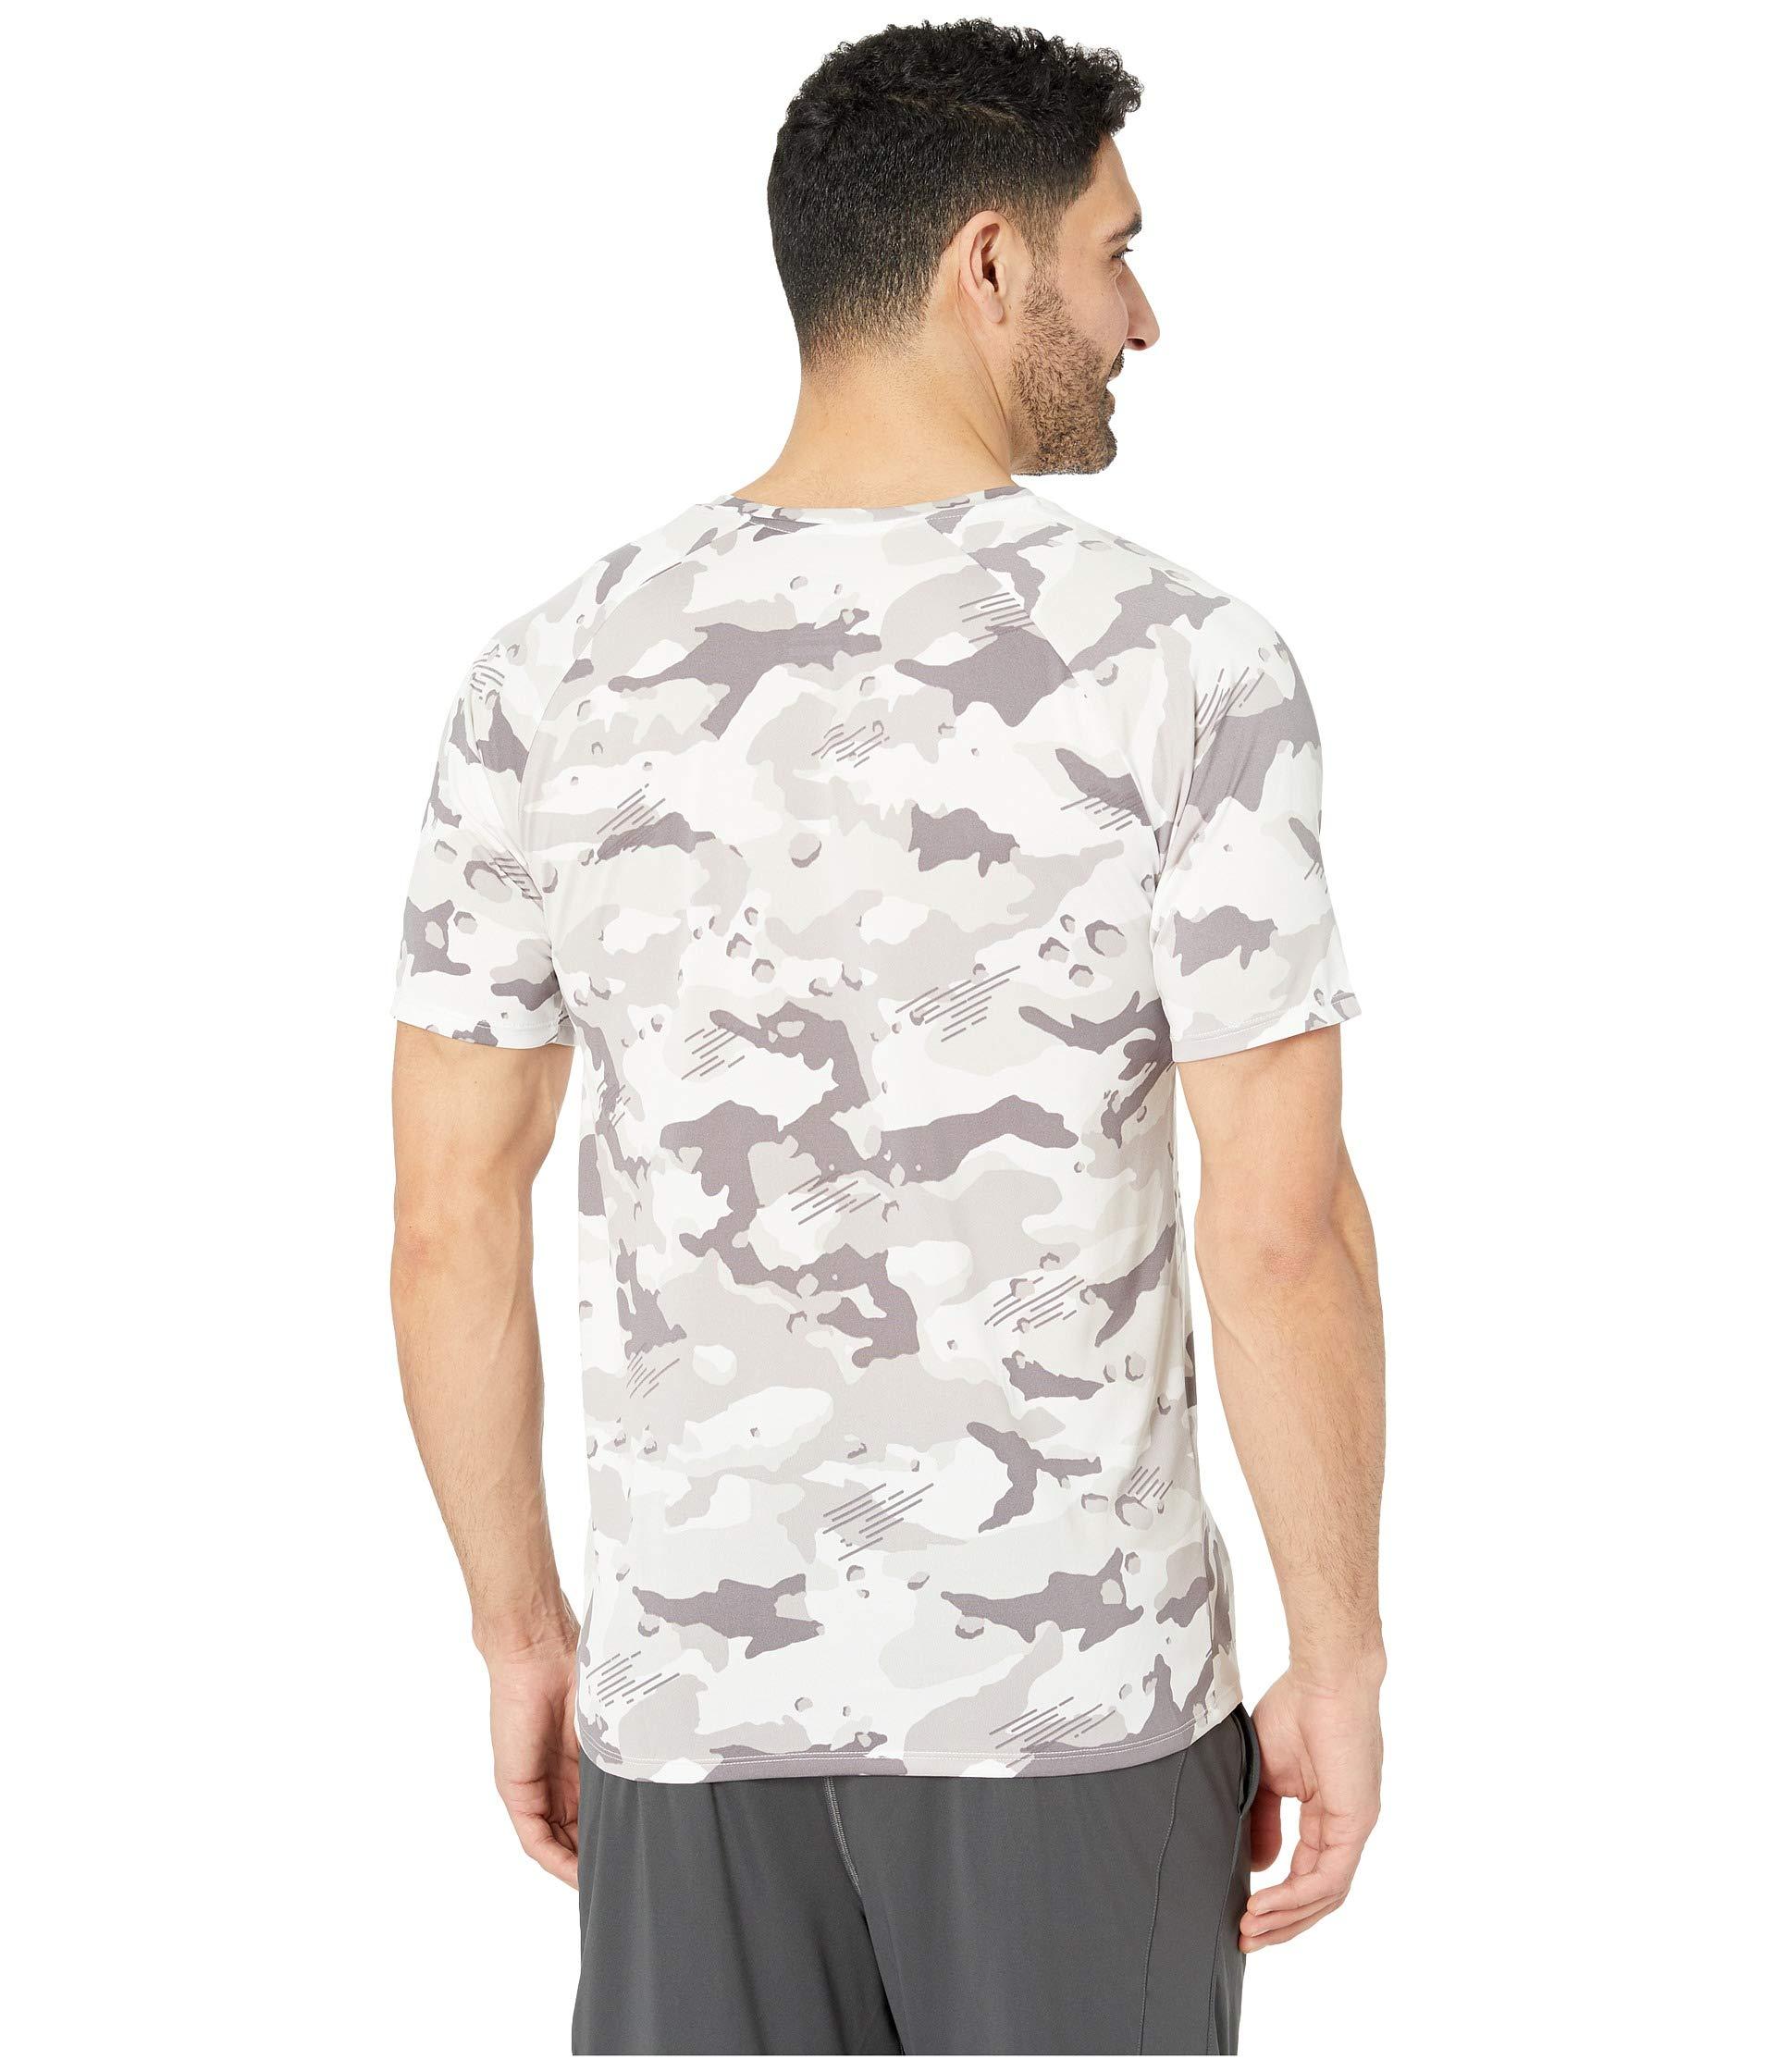 Nike Cotton Dry Legend Tee Camo All Over Print in White/Black Camo (White)  for Men | Lyst